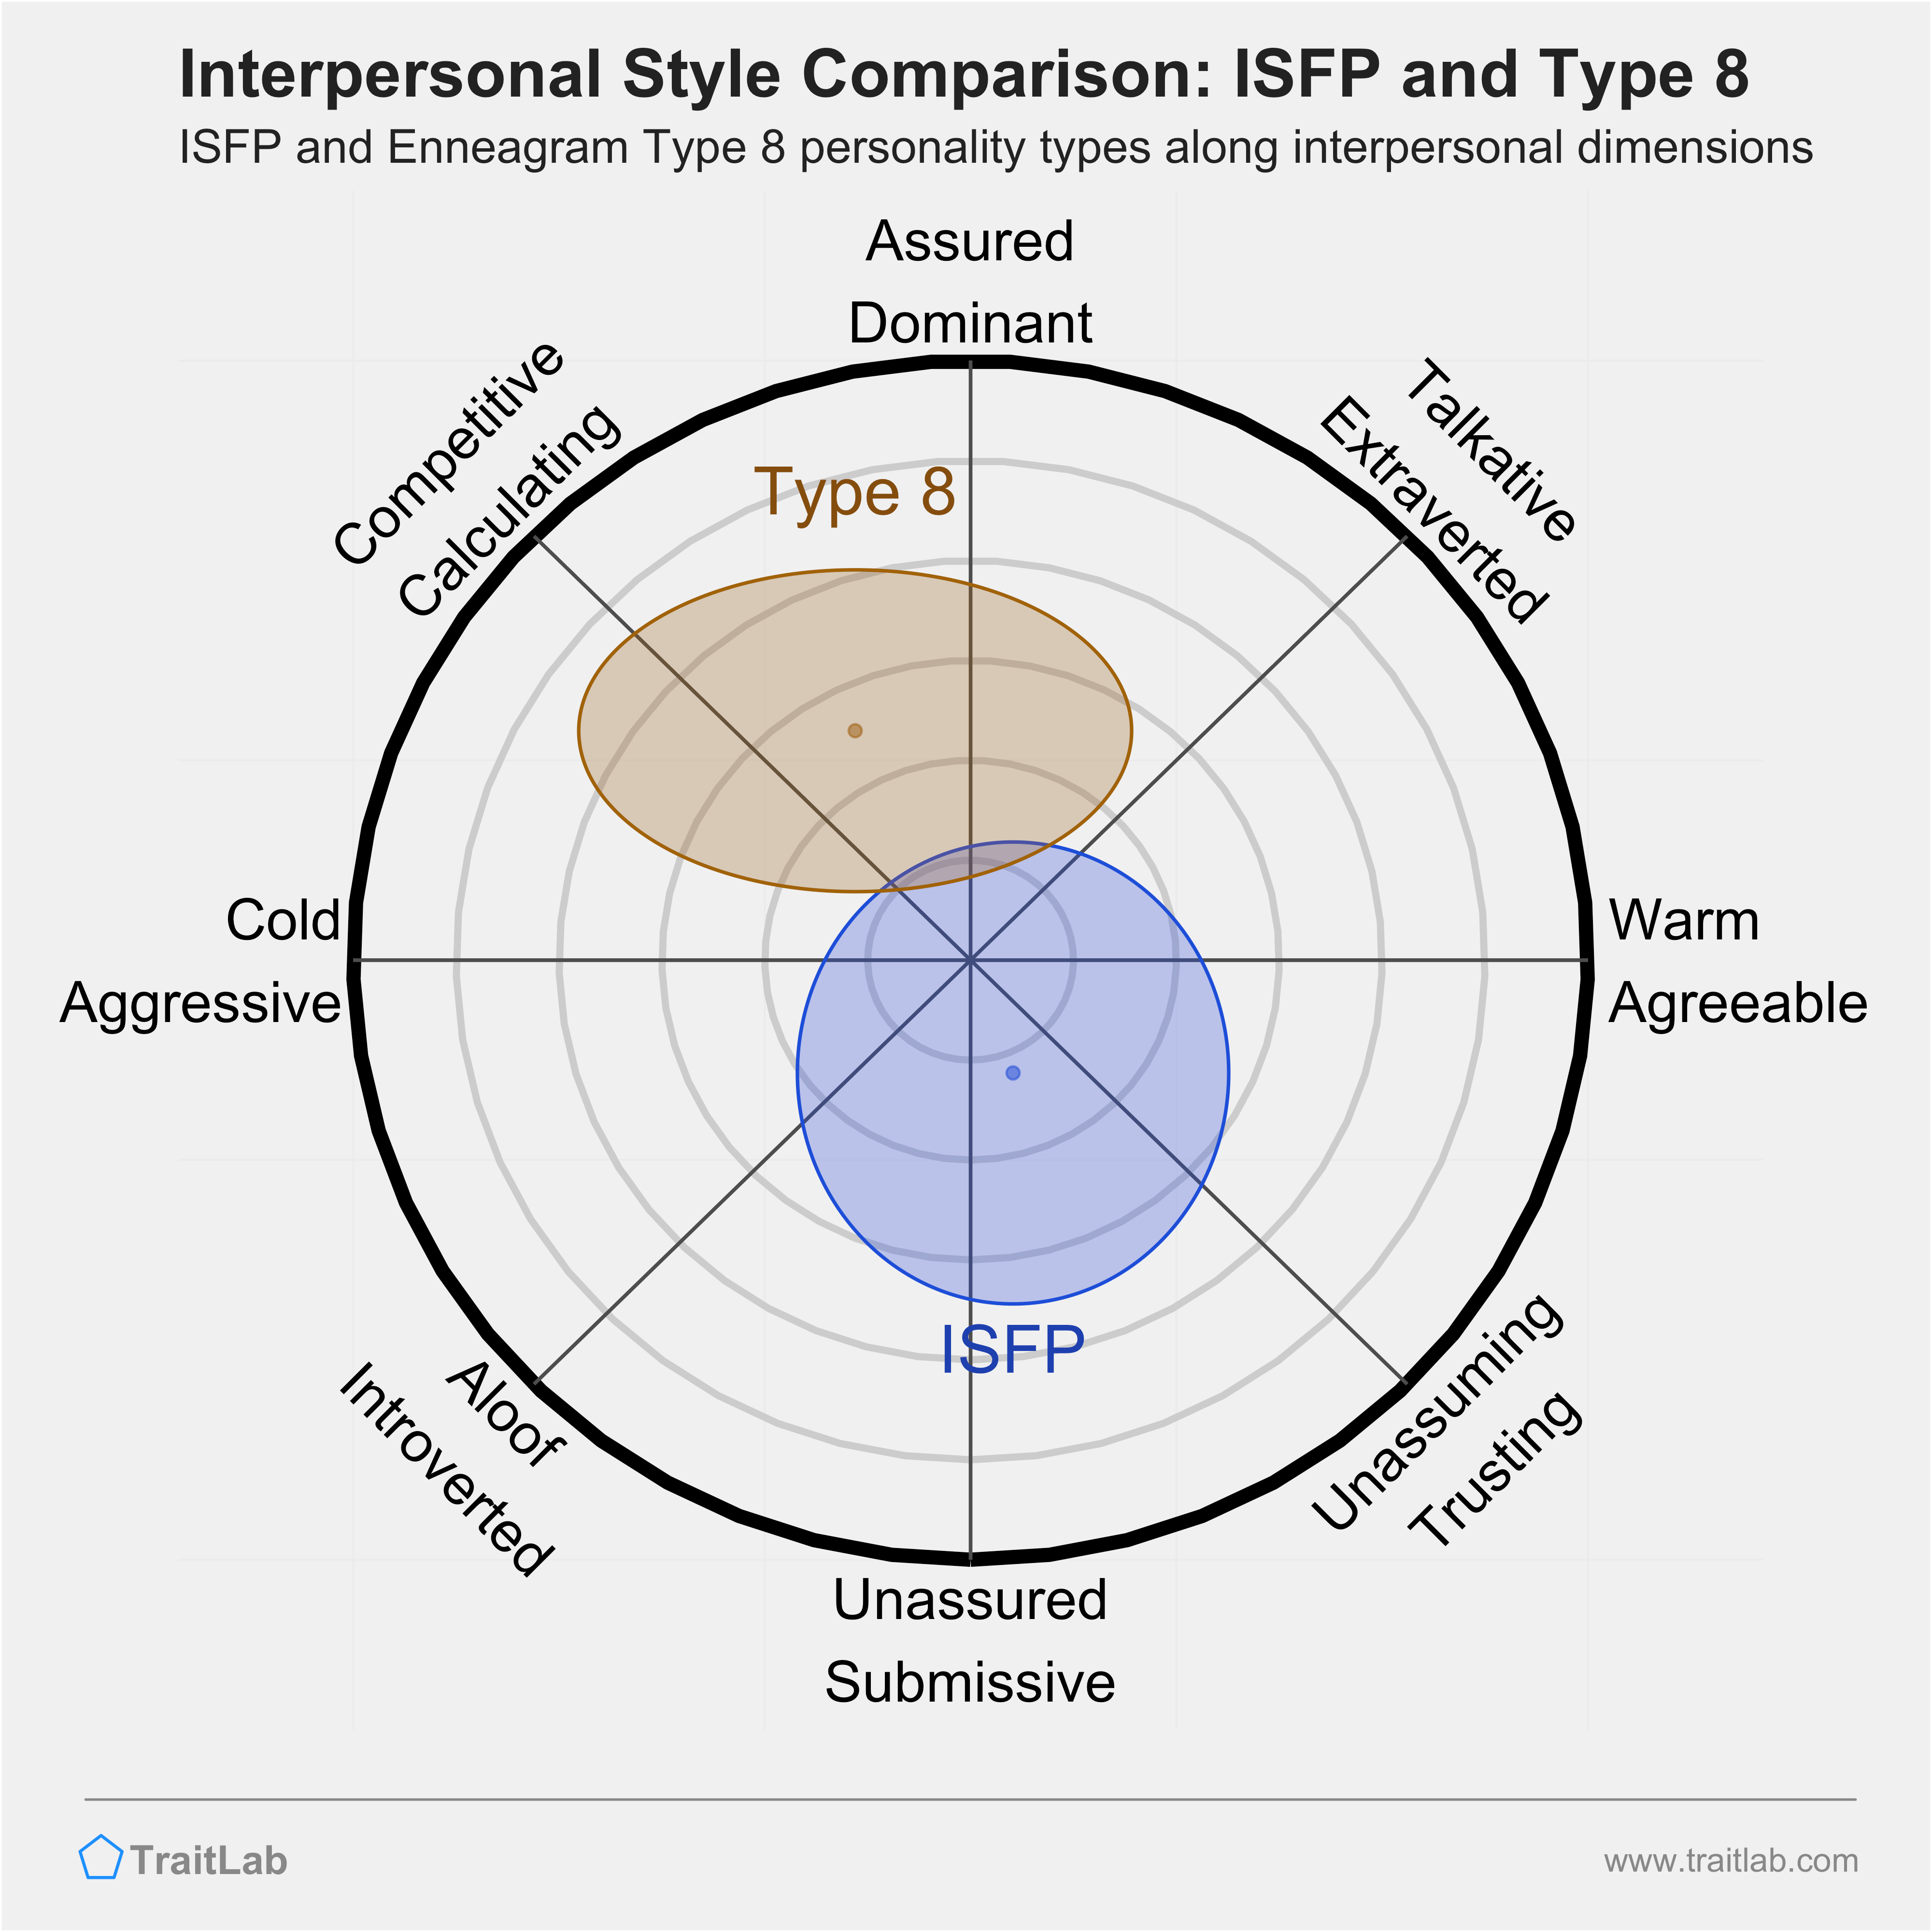 Enneagram ISFP and Type 8 comparison across interpersonal dimensions